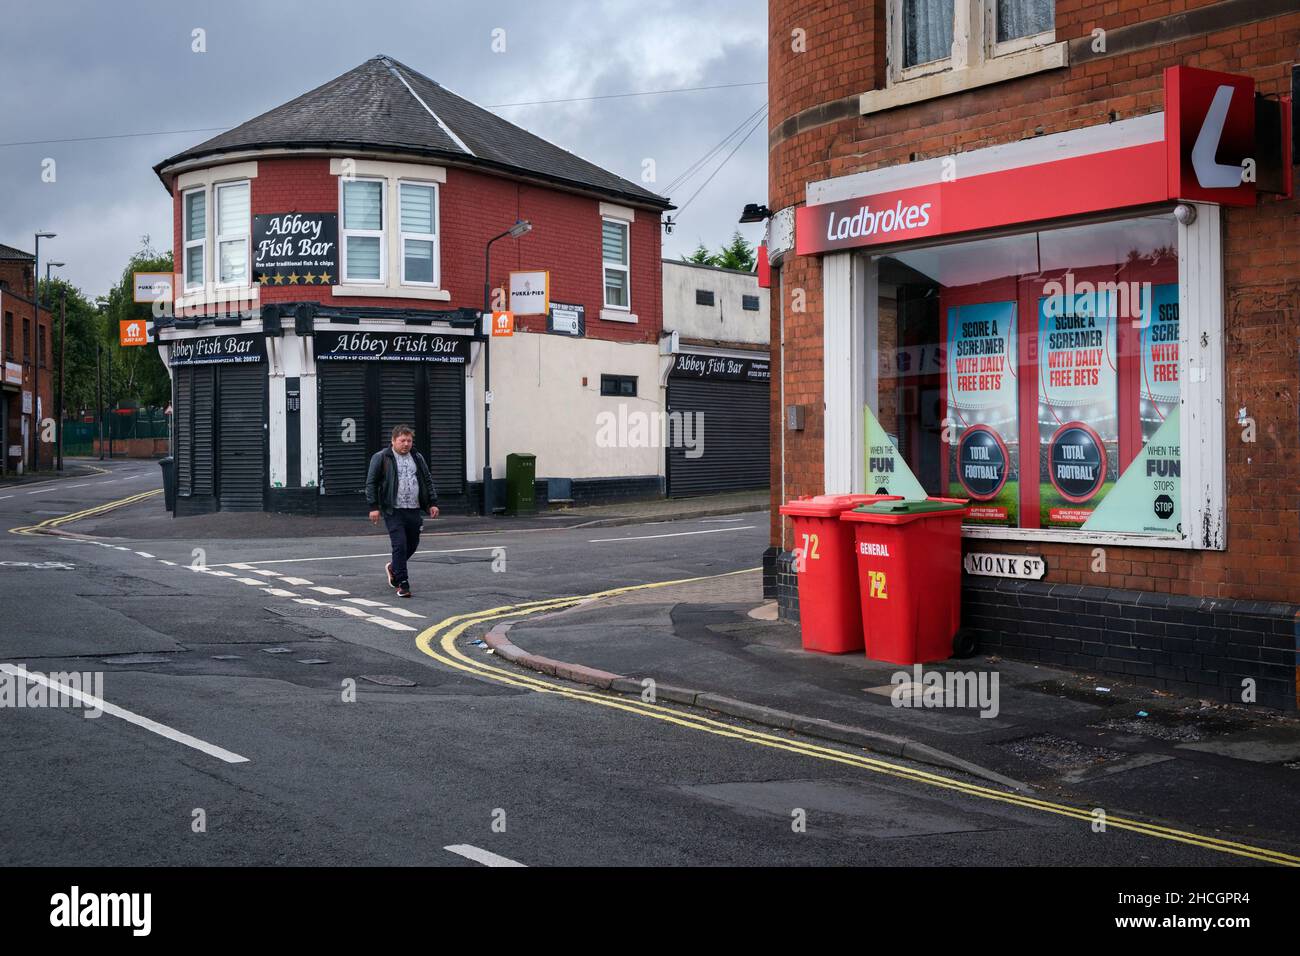 A street scene in an inner city area of Derby with a fish and chip shop and betting shop on the street corners, Derby, England Stock Photo